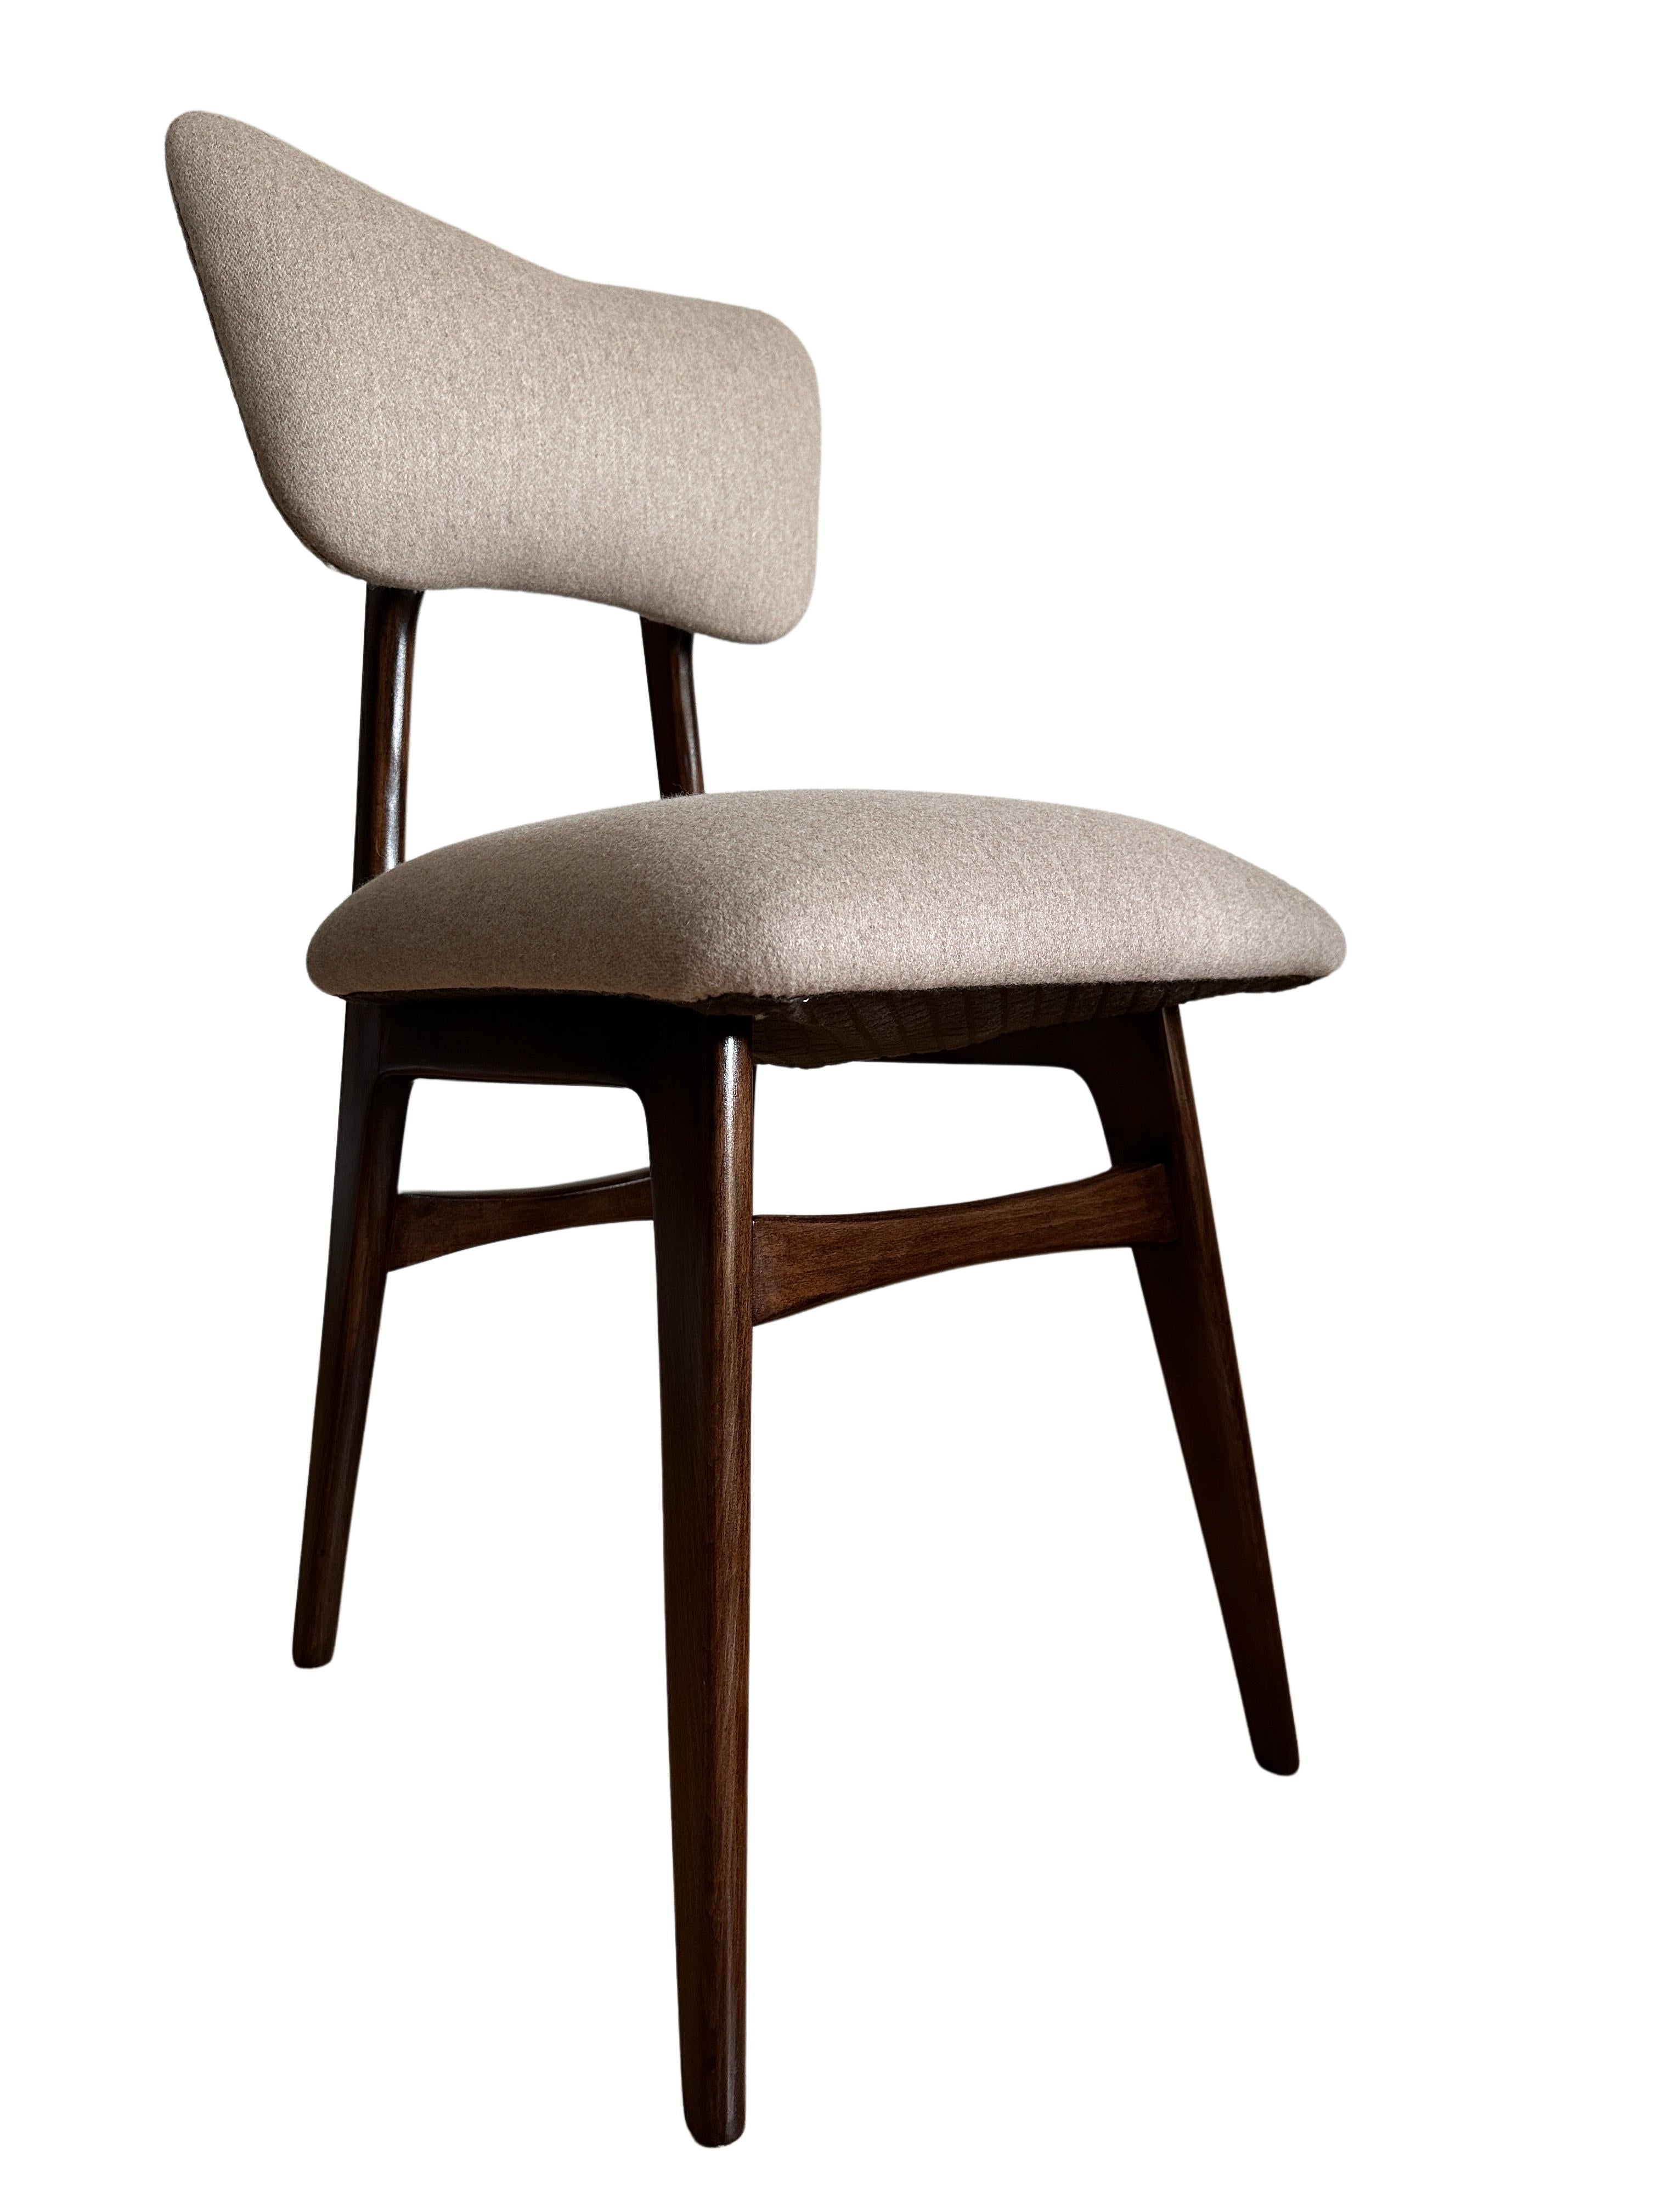 Unique set of two chairs manufactured in Poland in the 1960s, designed by Rajmund Halas. 

The upholstery is made of premium wool fabric, nice and soft to the touch. 
A noble, thick woollen fabric recommended for upholstery, but also suitable for